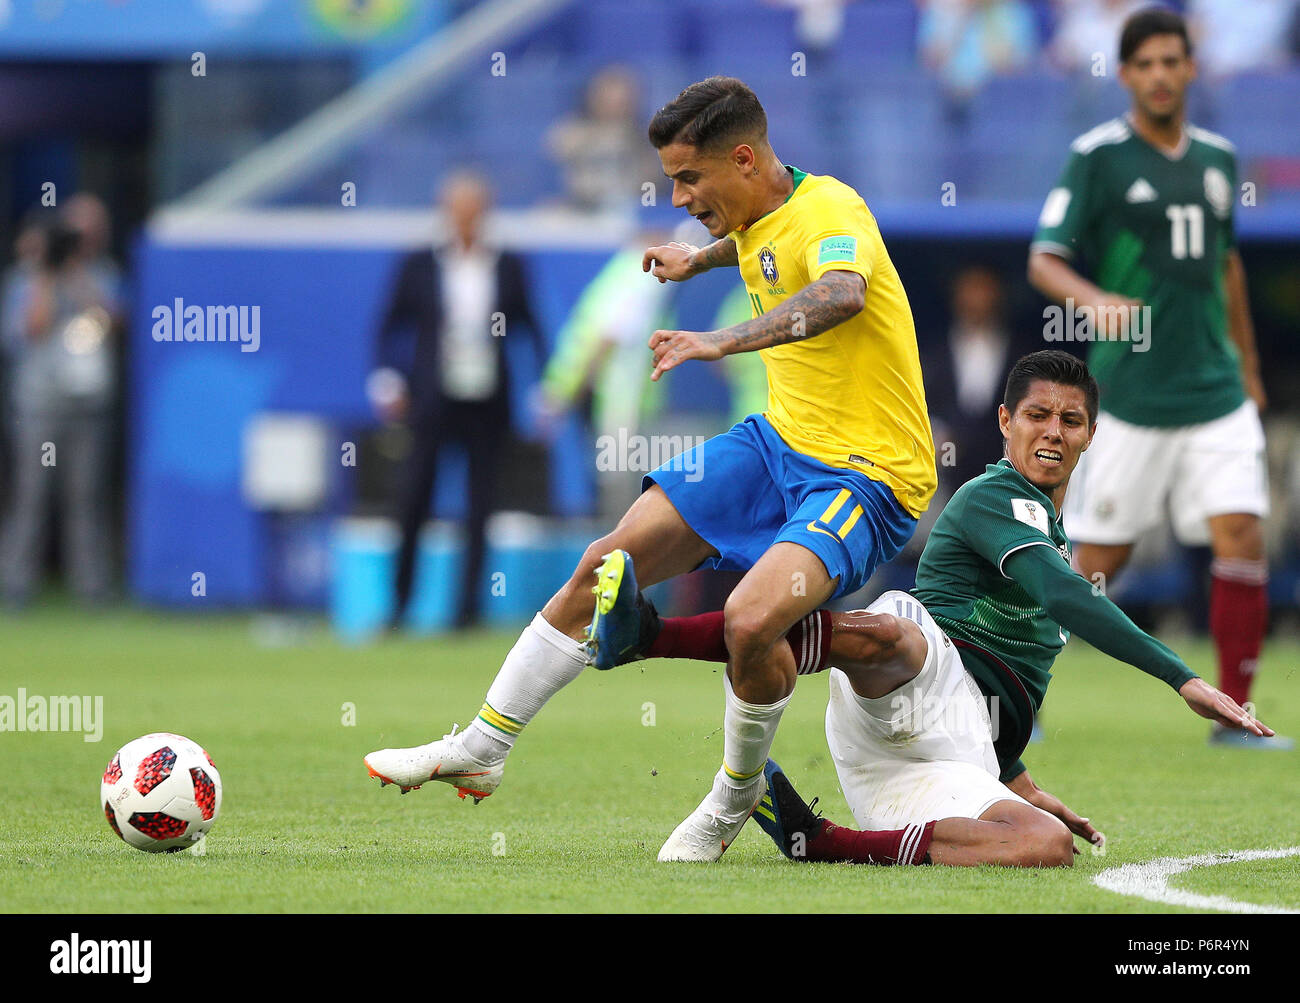 SAMARA, SA - 02.07.2018: BRAZIL VS. MEXICO - Philippe Coutinho of Brazil and Hugo AYALA of Mexico during the match between Brazil and Mexico, valid for the eighth round of the 2018 World Cup held at the Samara Arena in Samara, Russia. (Photo: Rodolfo Buhrer/La Imagem/Fotoarena) Stock Photo